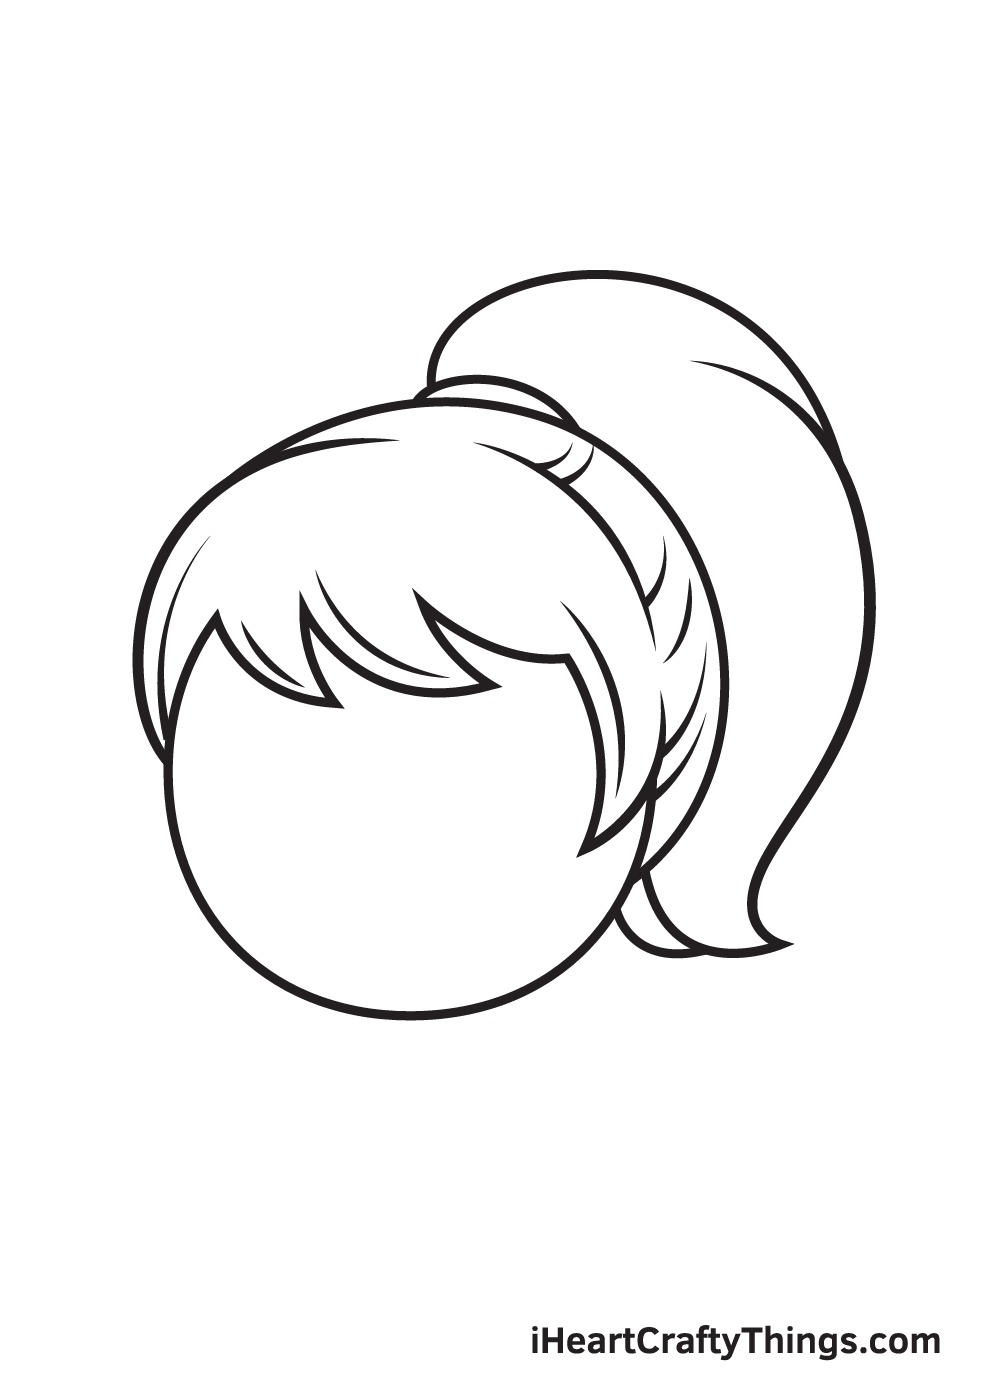 how to draw hair step by step for kids